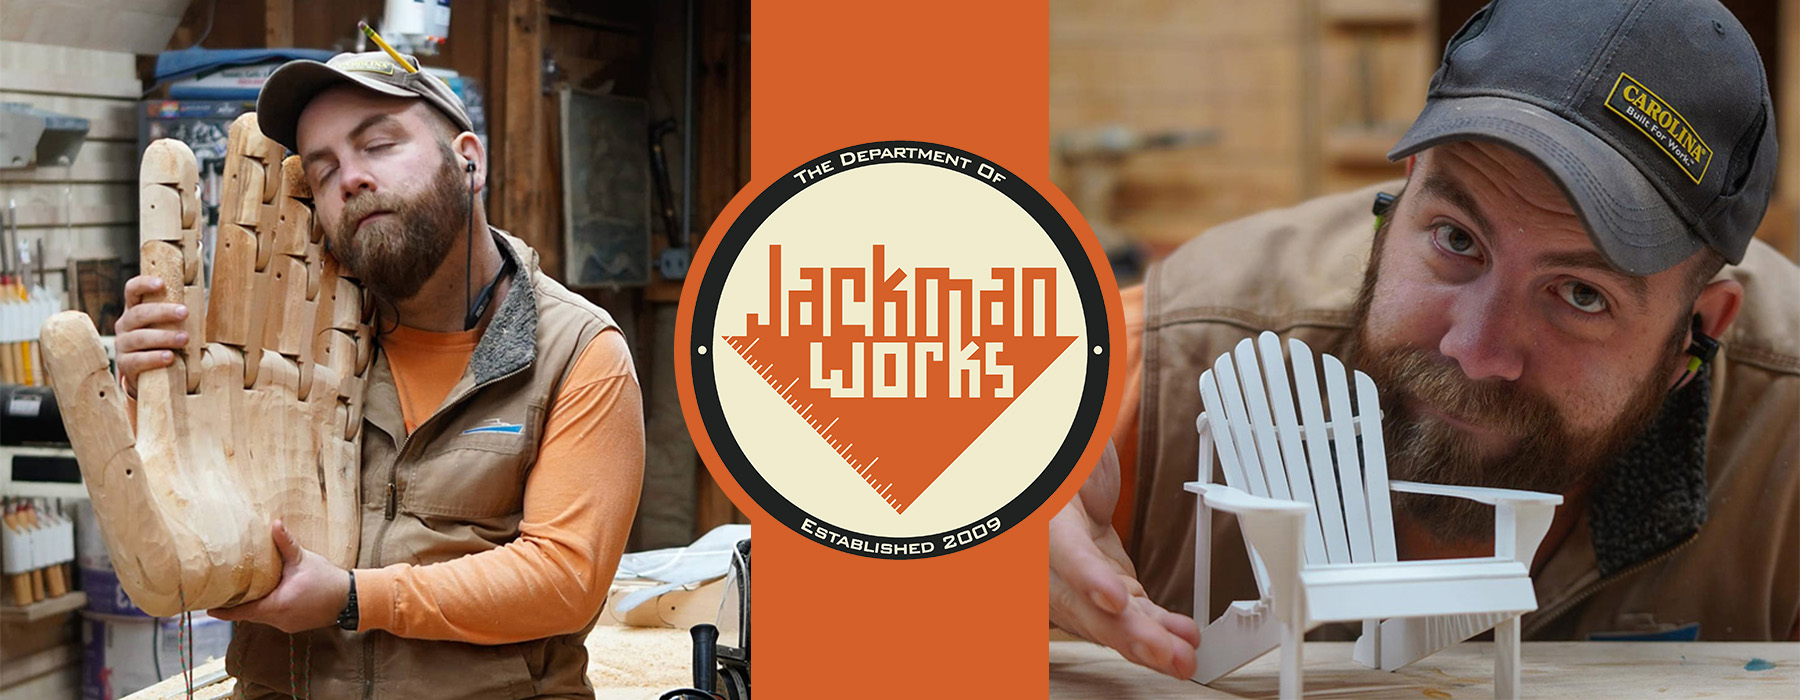 Jackman holds large wooden hand and poses next to miniature lawn chair. Jackman Works Logo: The Department of Jackman works, established 2009.